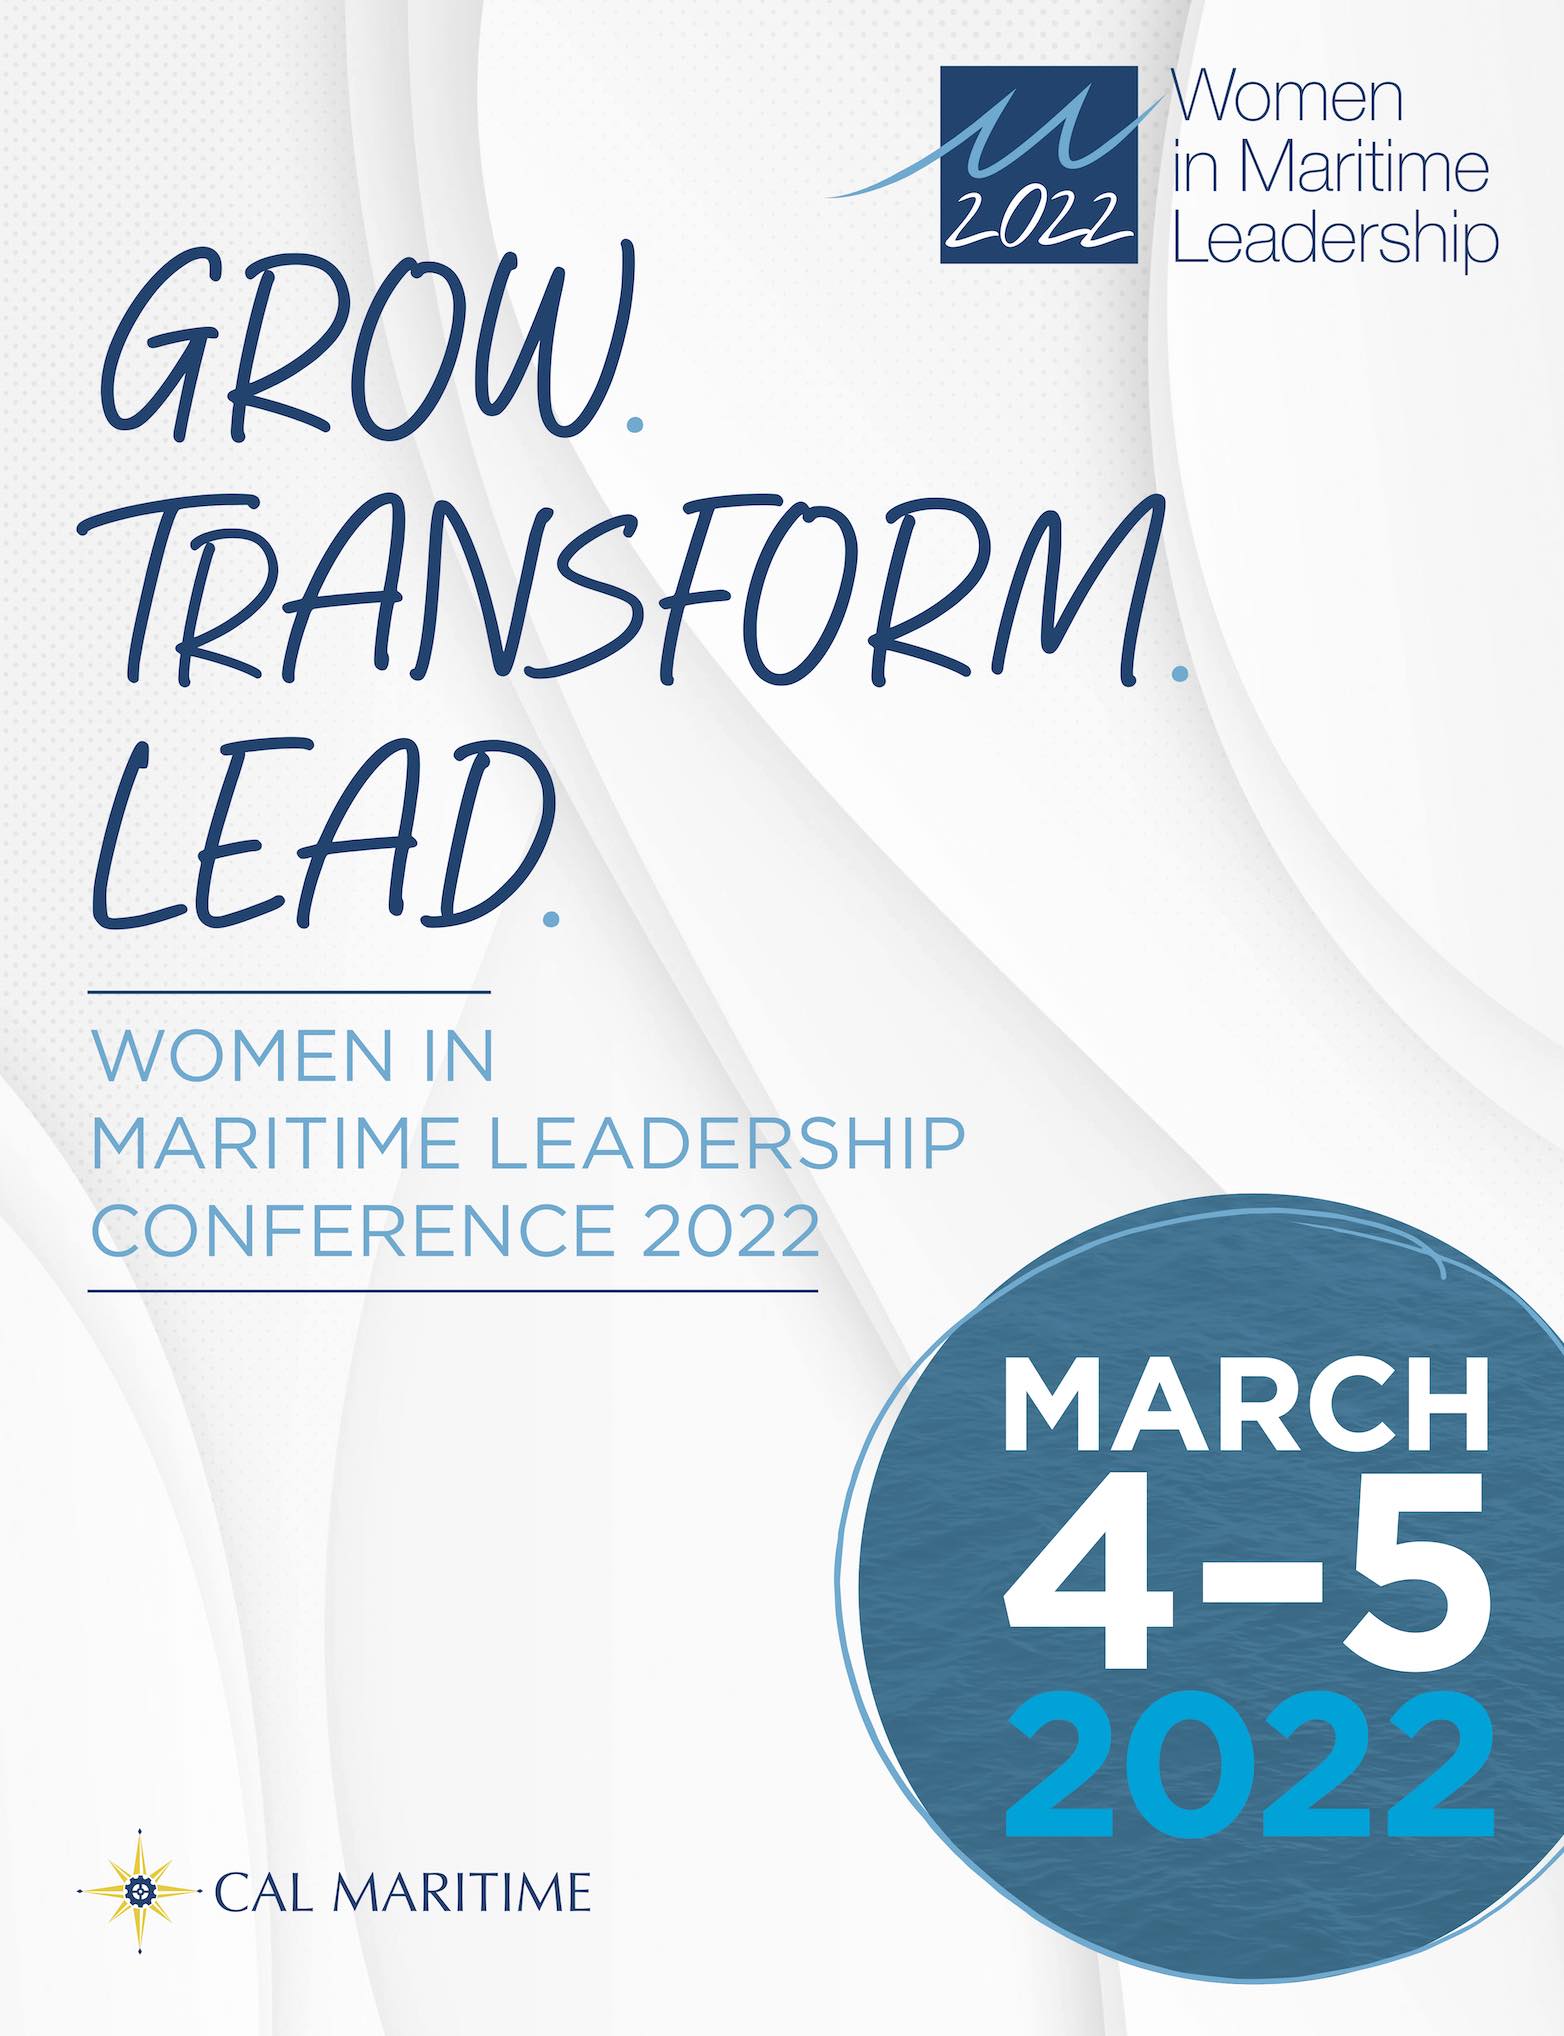 Women in Maritime Leadership Conference March '22